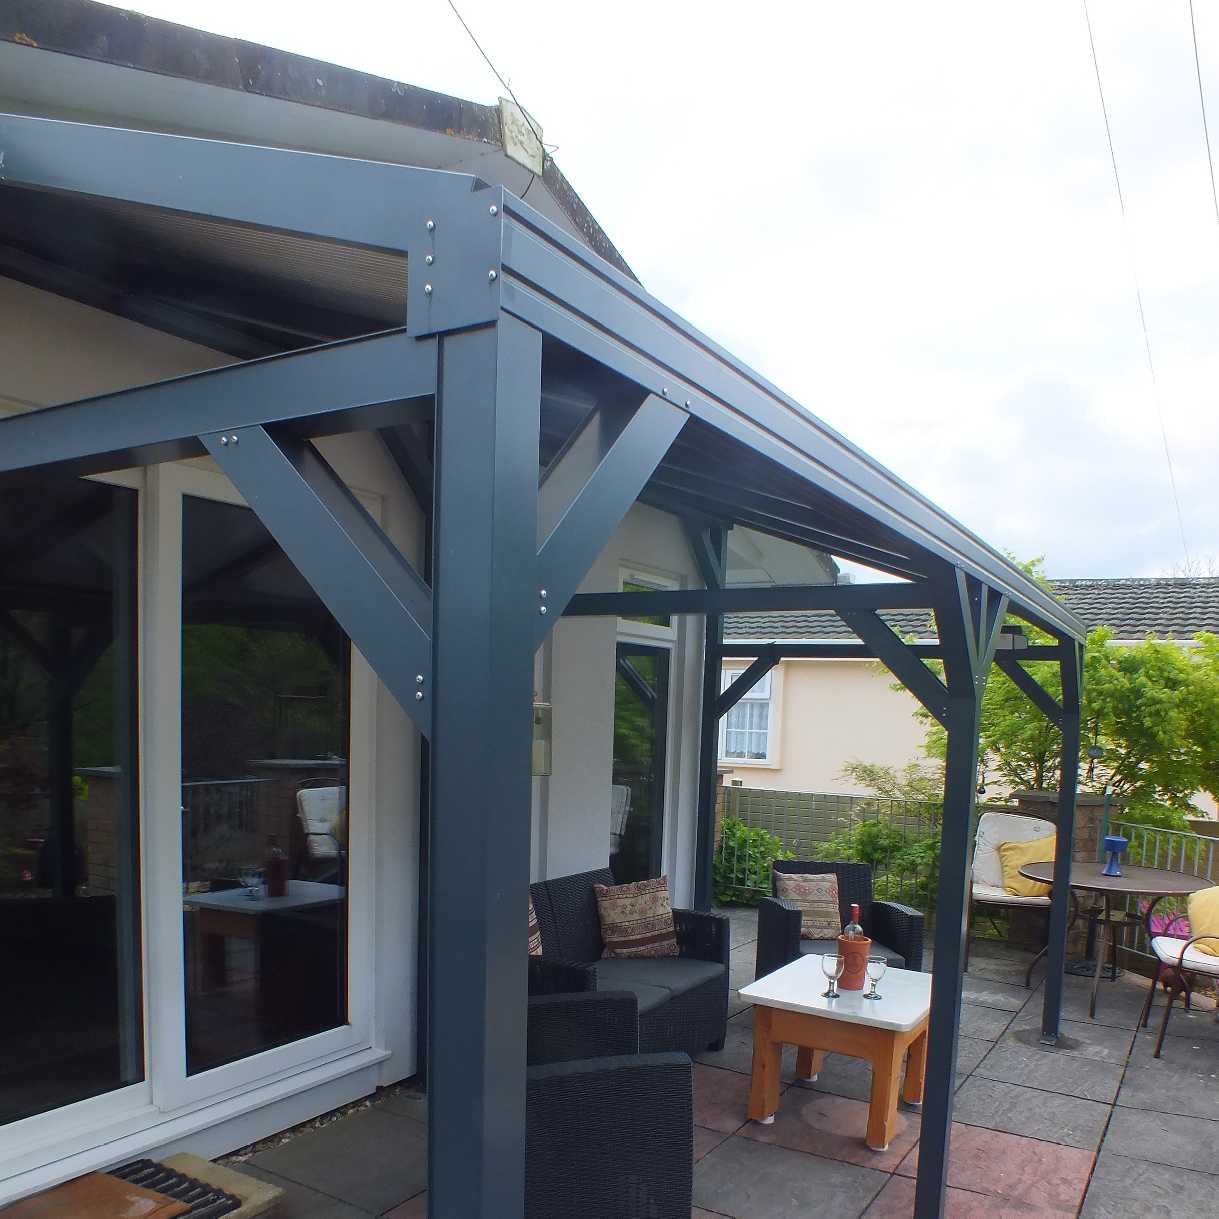 Affordable Omega Smart Free-Standing, Anthracite Grey MonoPitch Roof Canopy with 16mm Polycarbonate Glazing - 7.0m (W) x 4.0m (P), (8) Supporting Posts